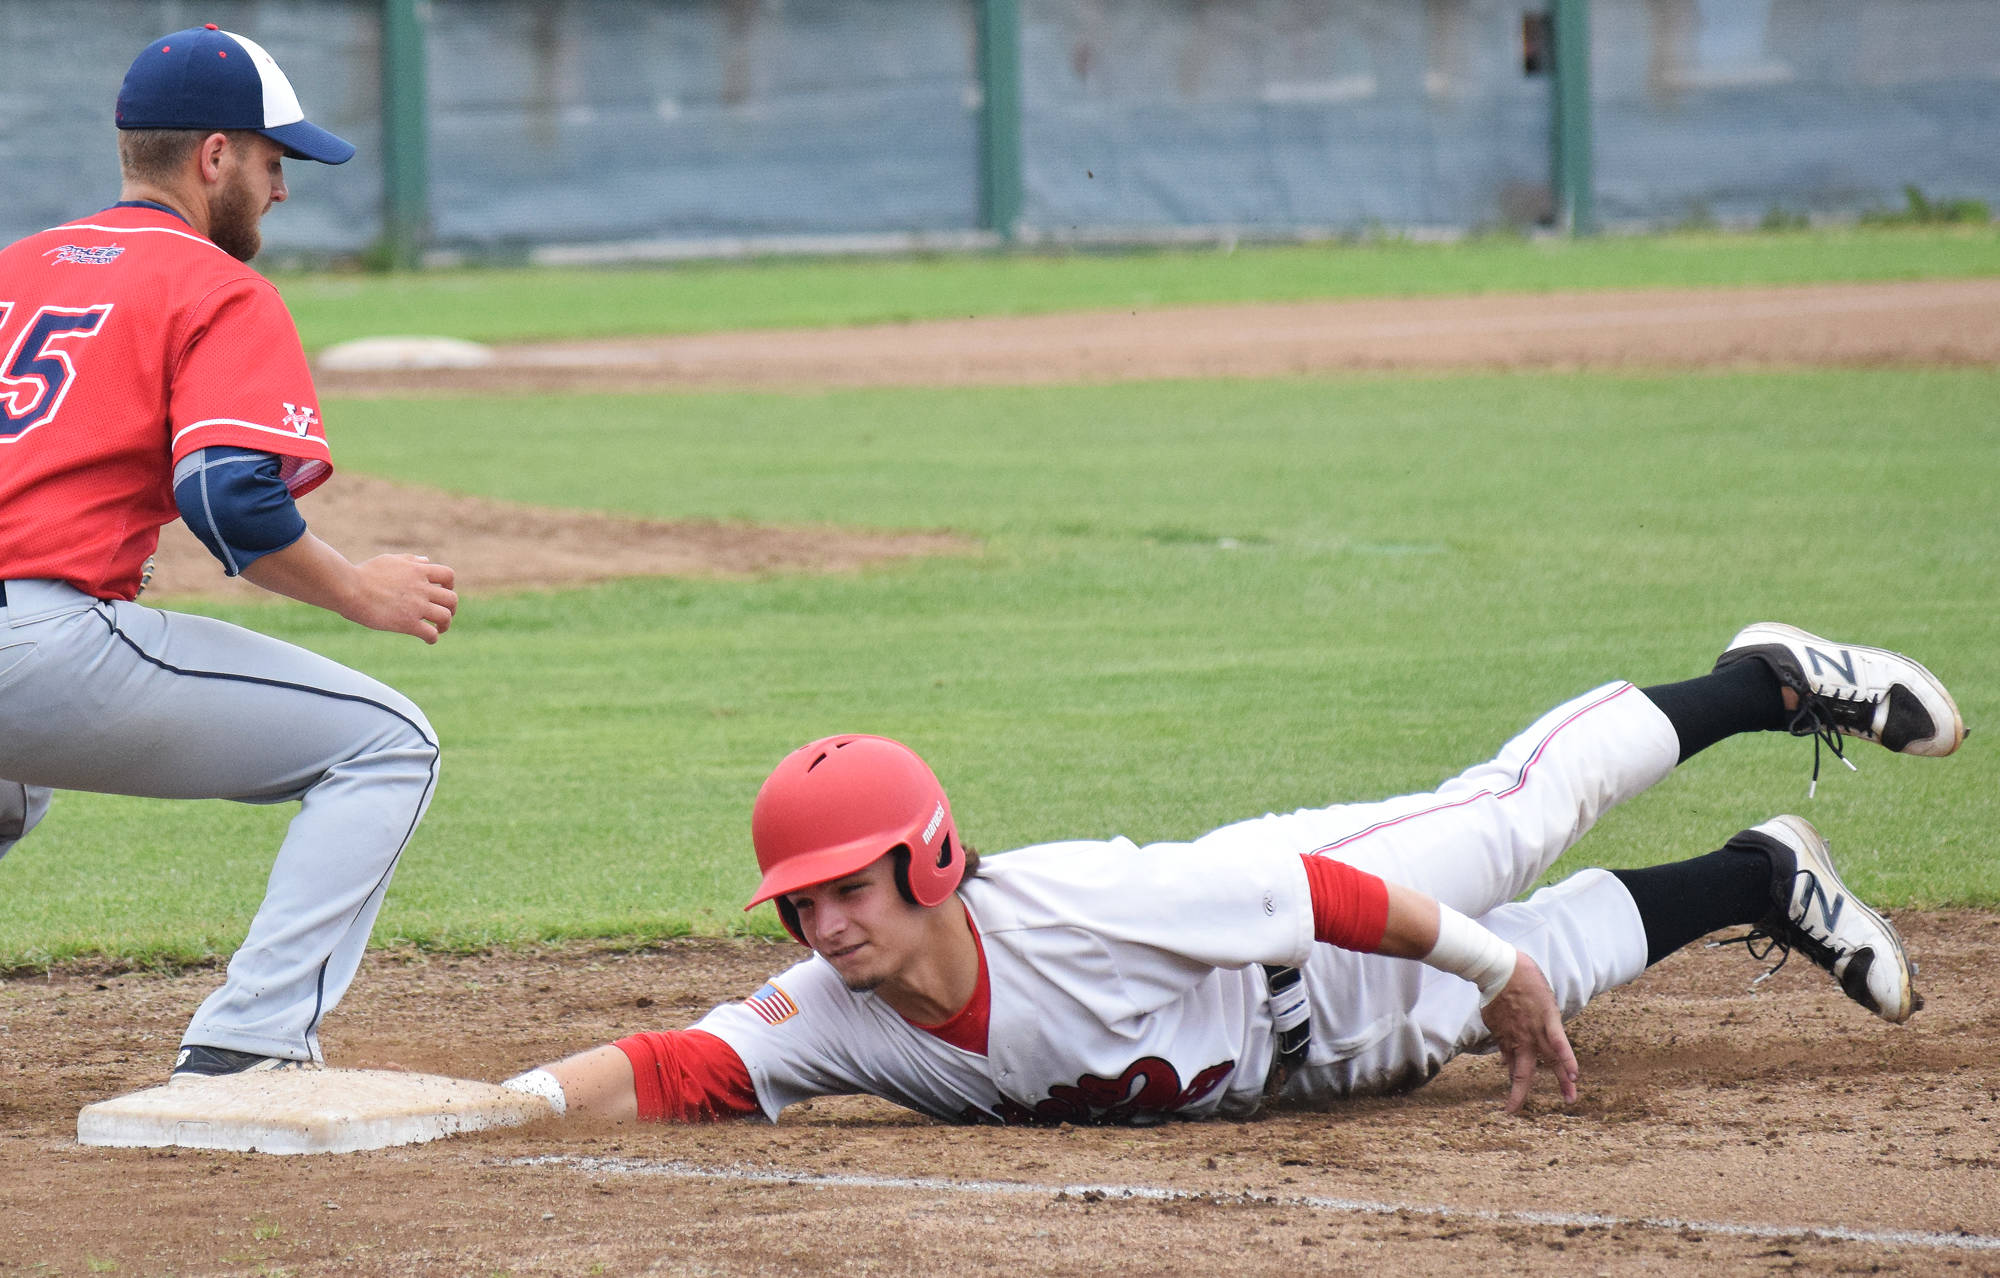 Peninsula Oilers baserunner Jack Bauer tags up to first base under the glove of Adam Rojas on Friday against the Chugiak Chinooks at Coral Seymour Memorial Park in Kenai. (Photo by Joey Klecka/Peninsula Clarion)